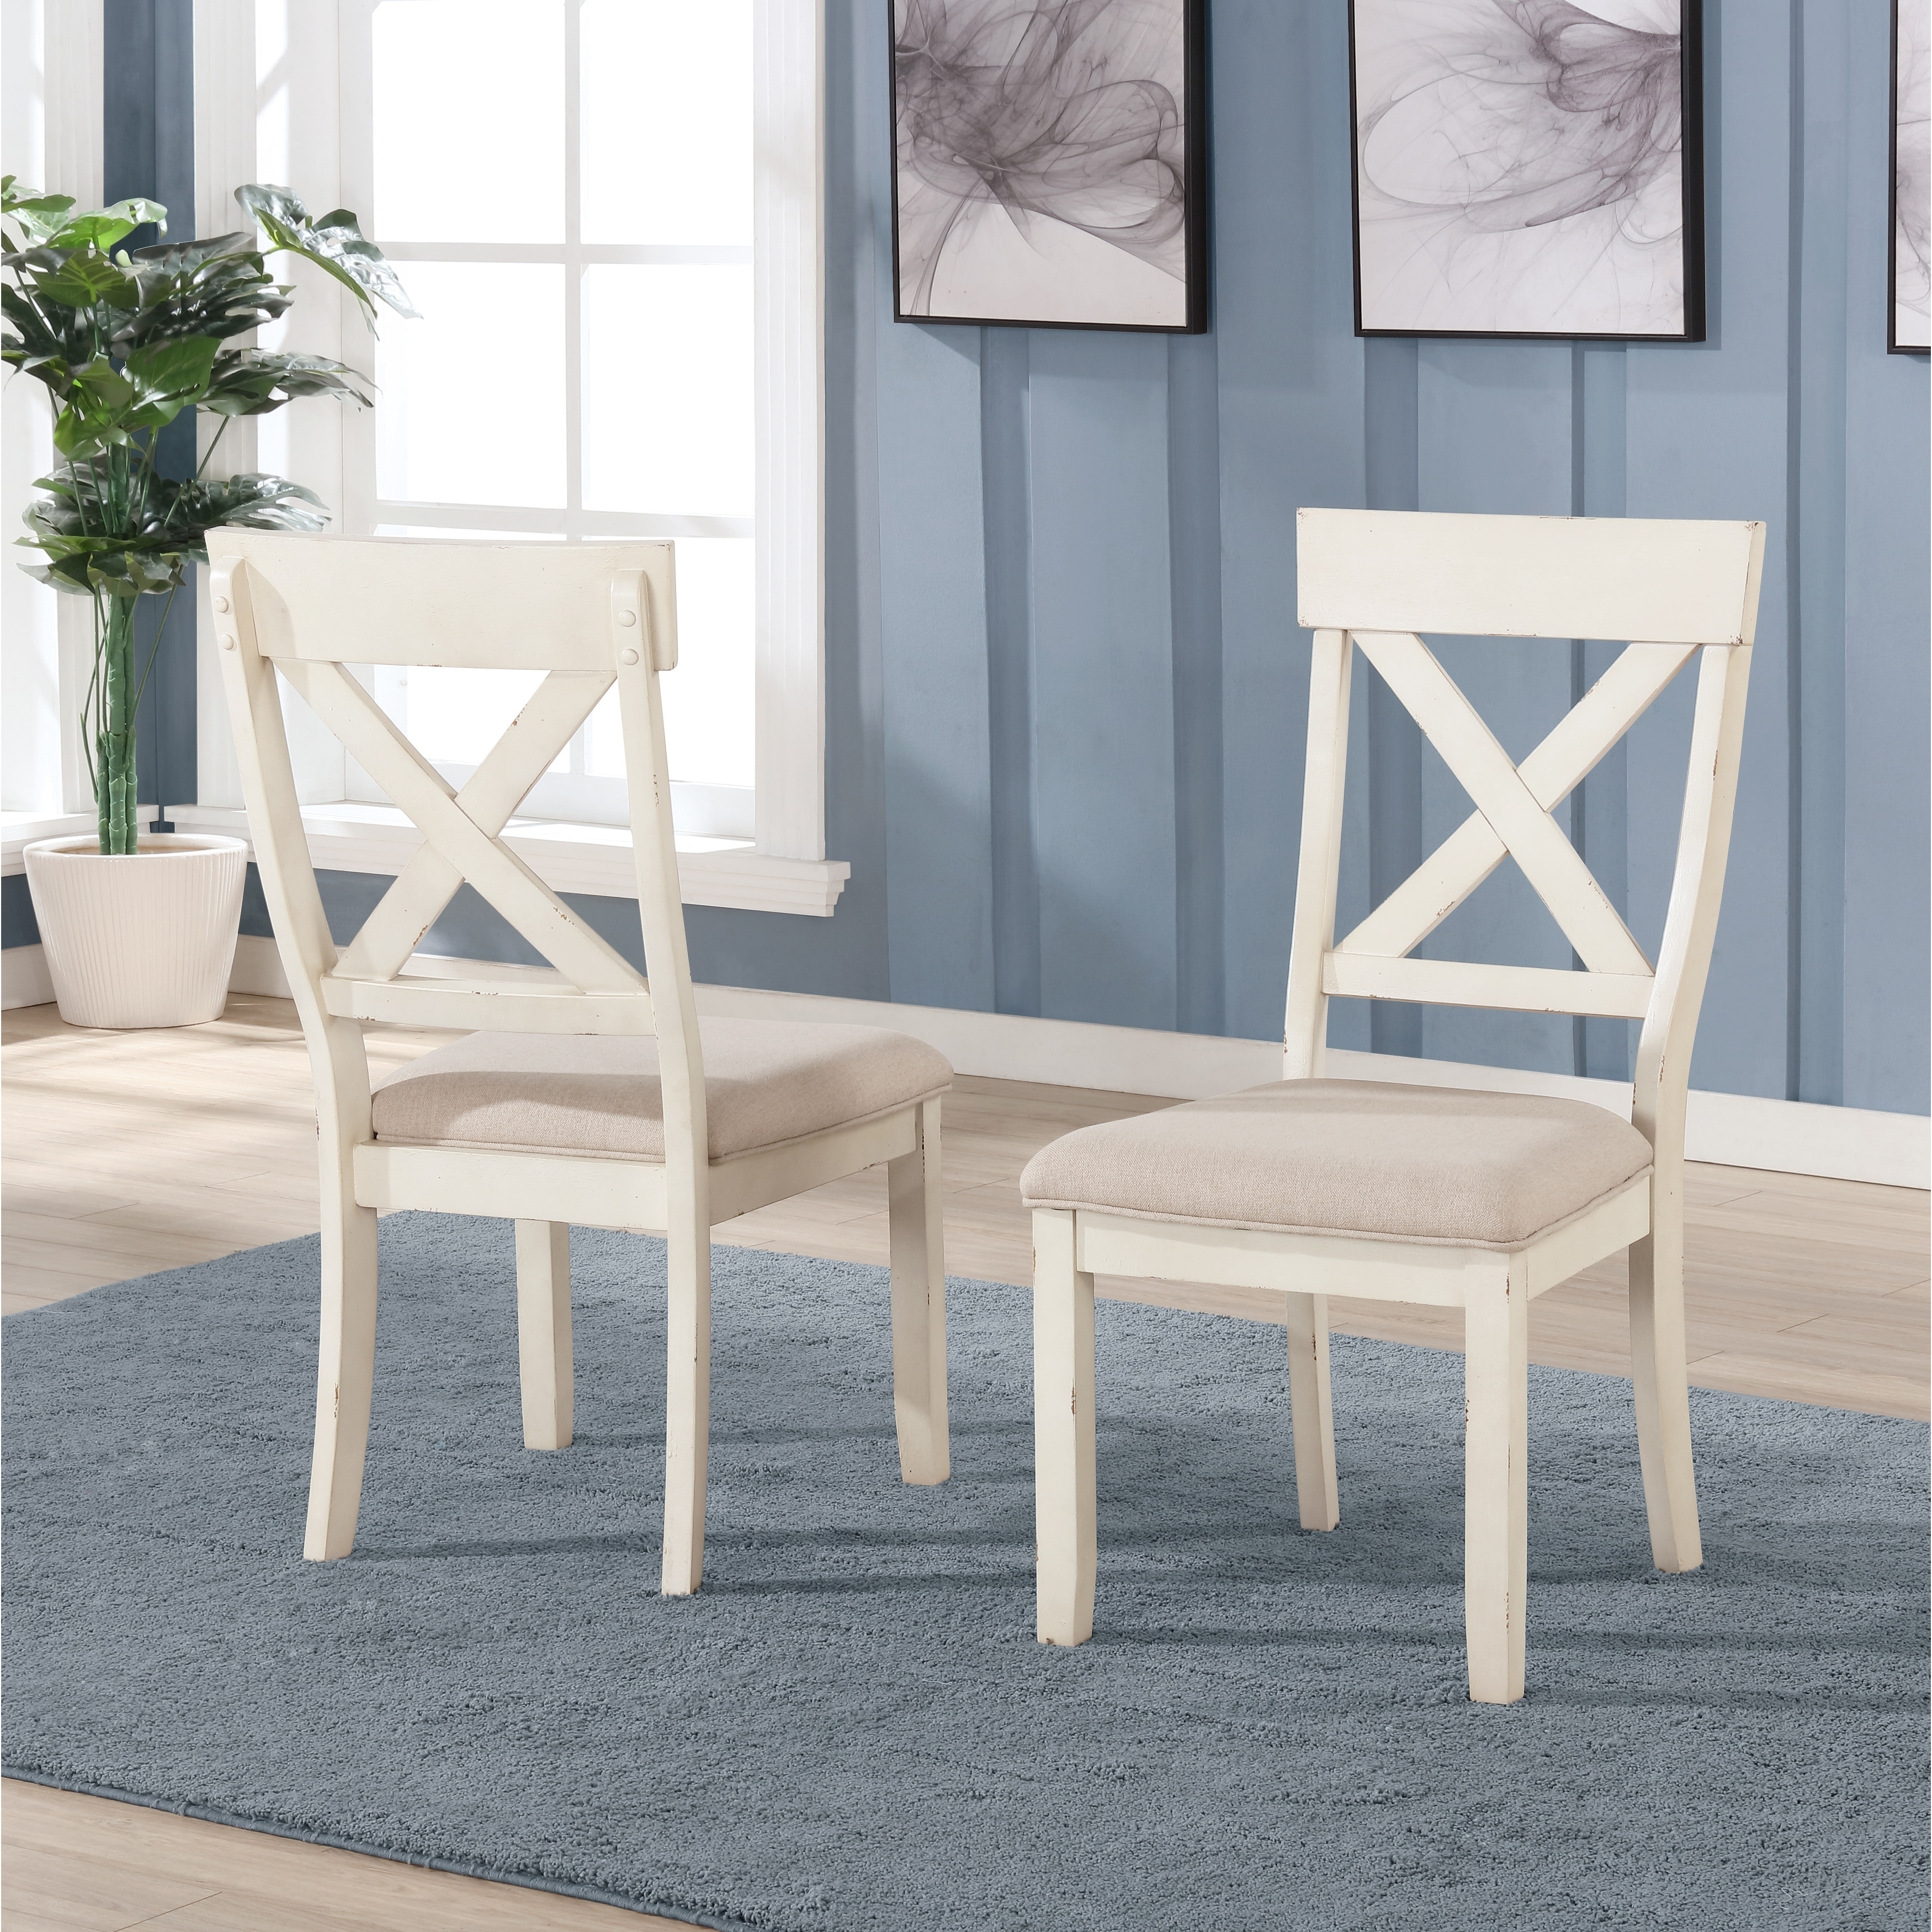 Prato Antique White Wood Cross Back Upholstered Dining Chairs